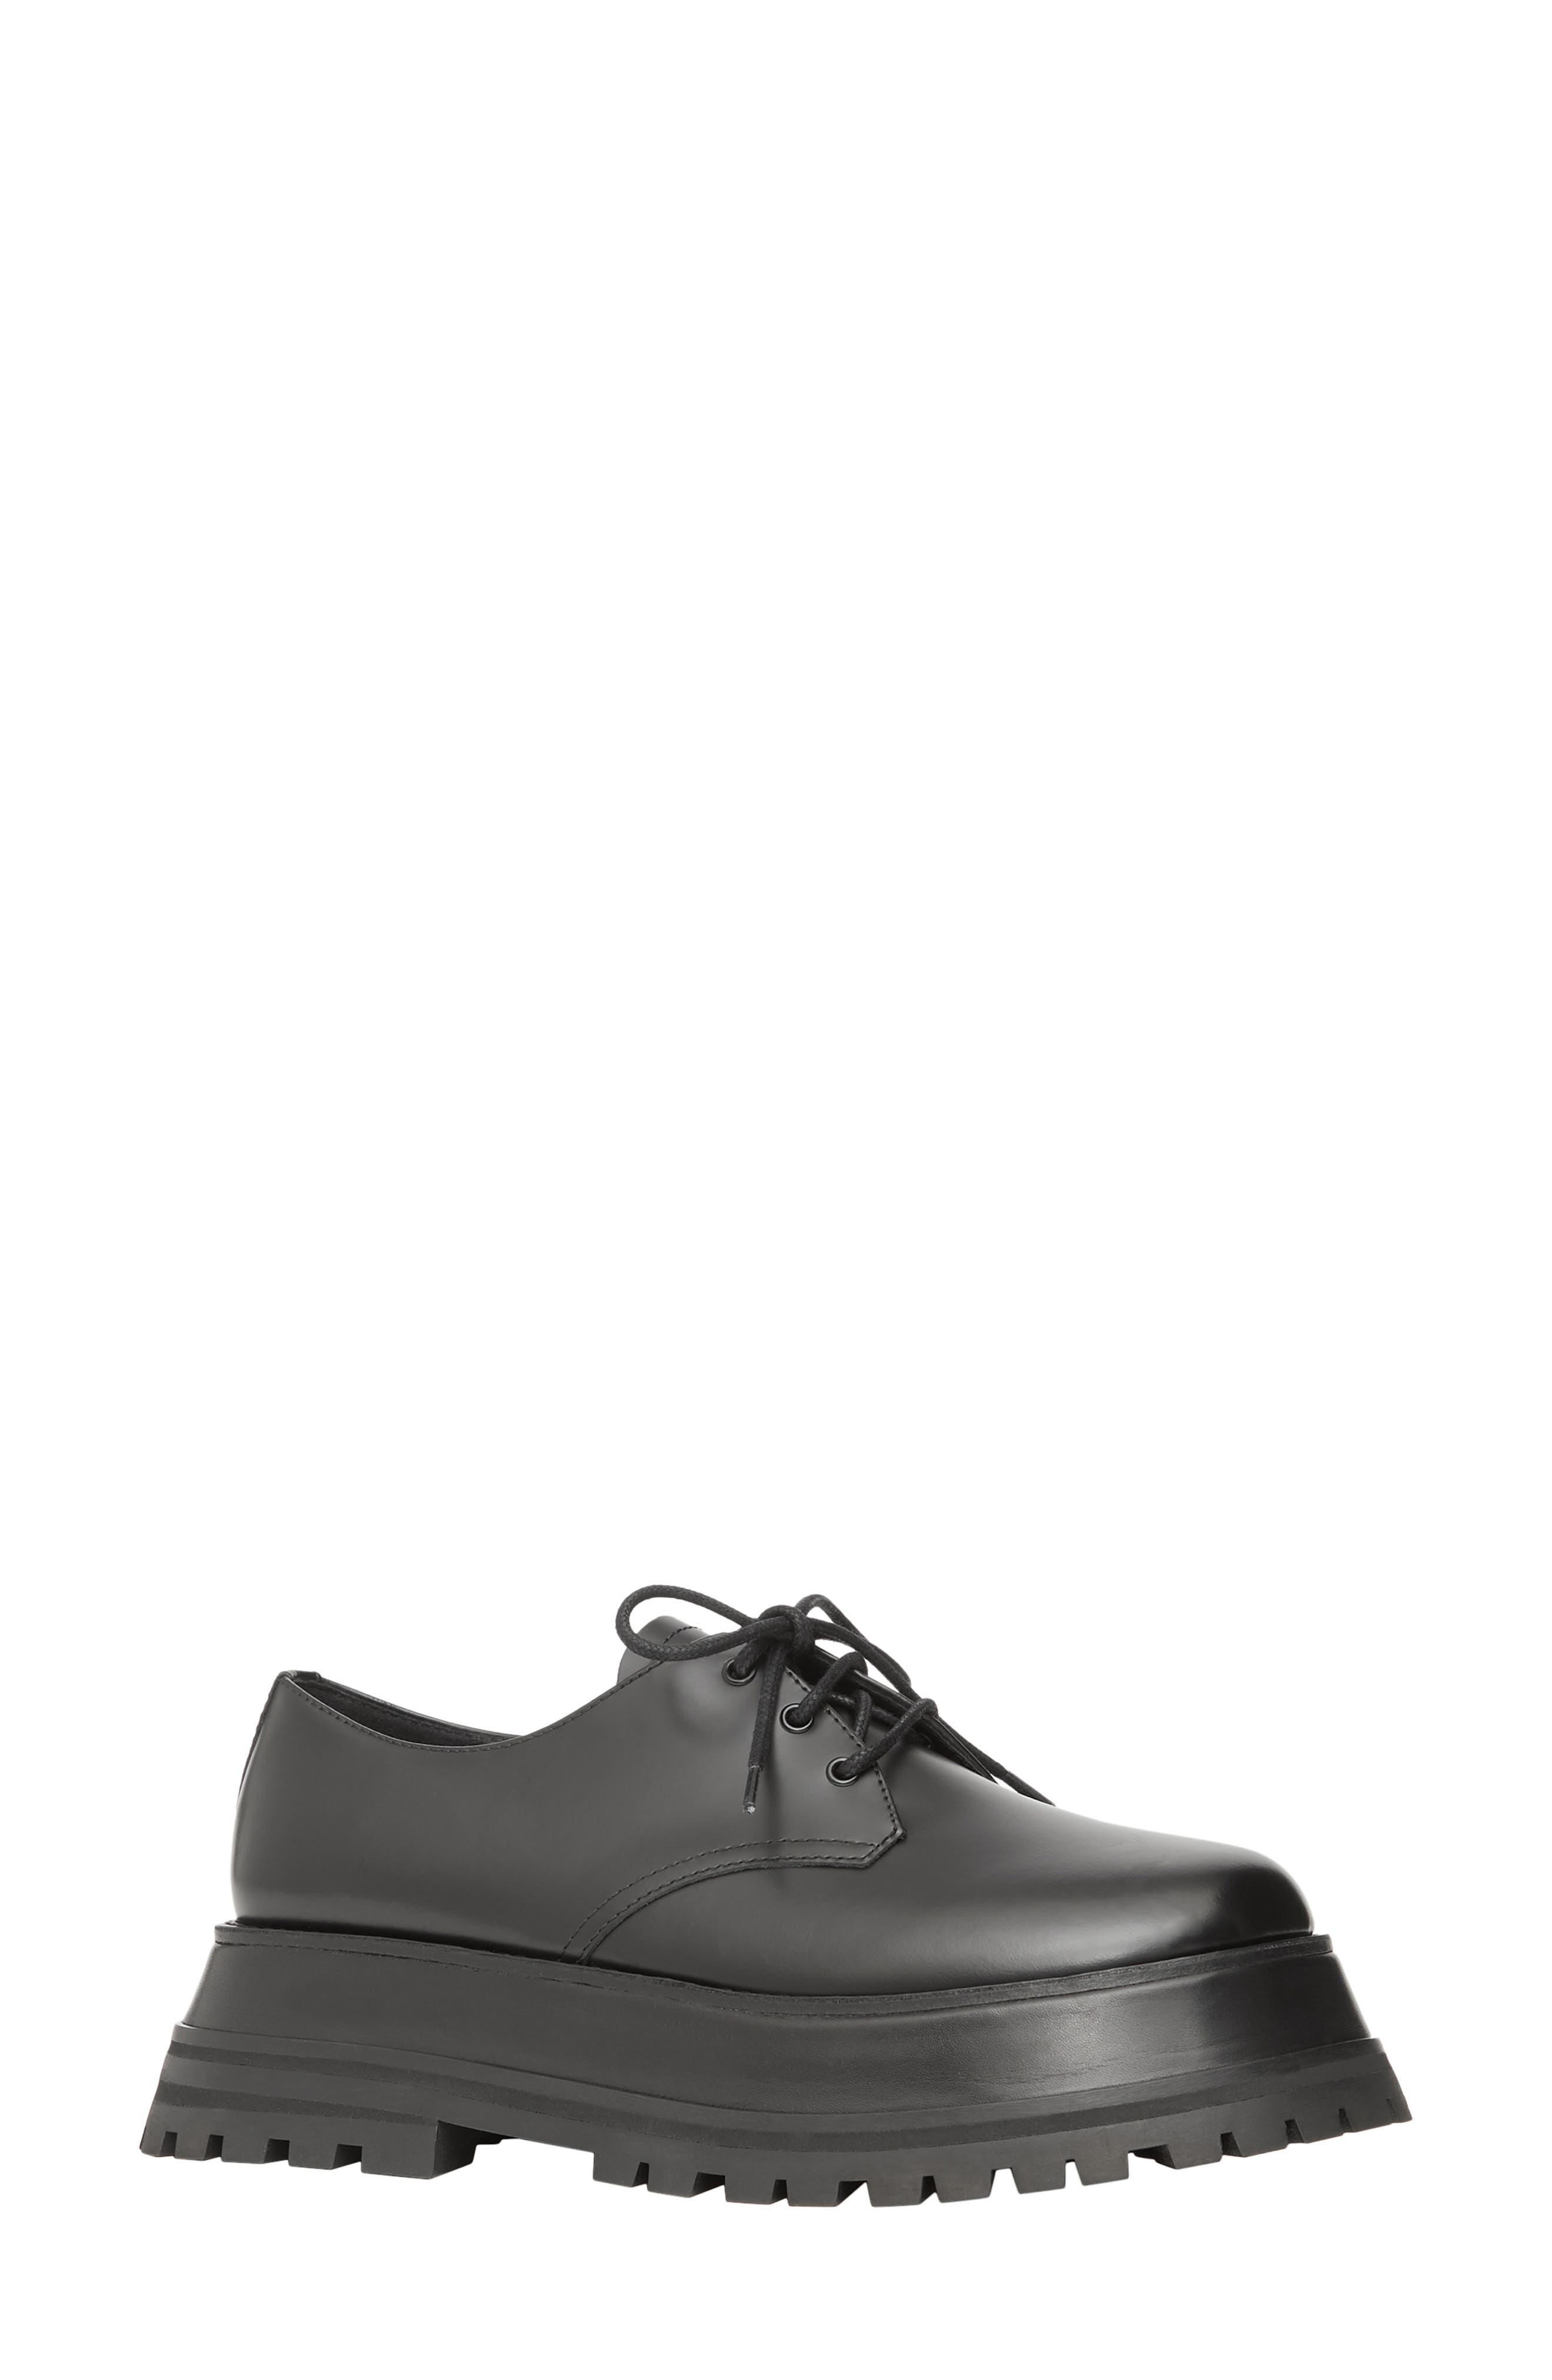 burberry oxford shoes women